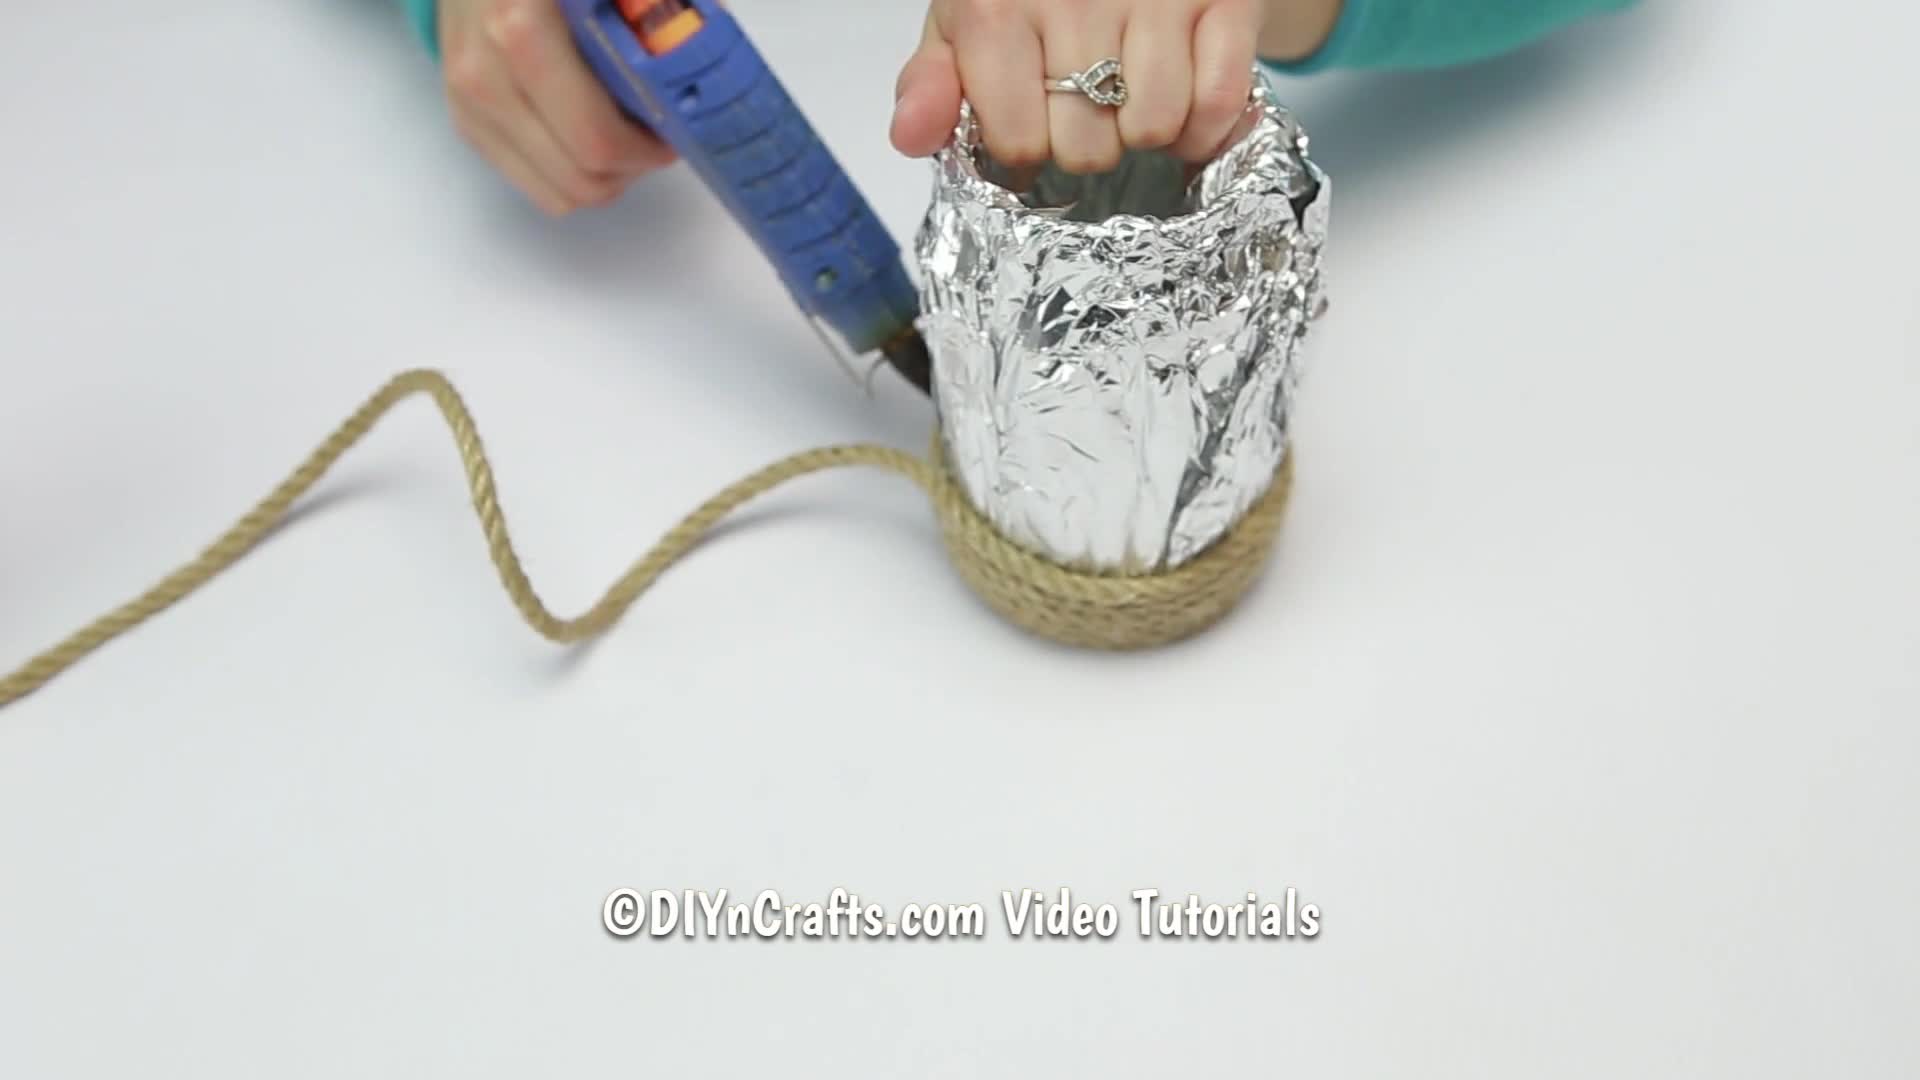 Can You Make a Rope with Aluminum Foil? 